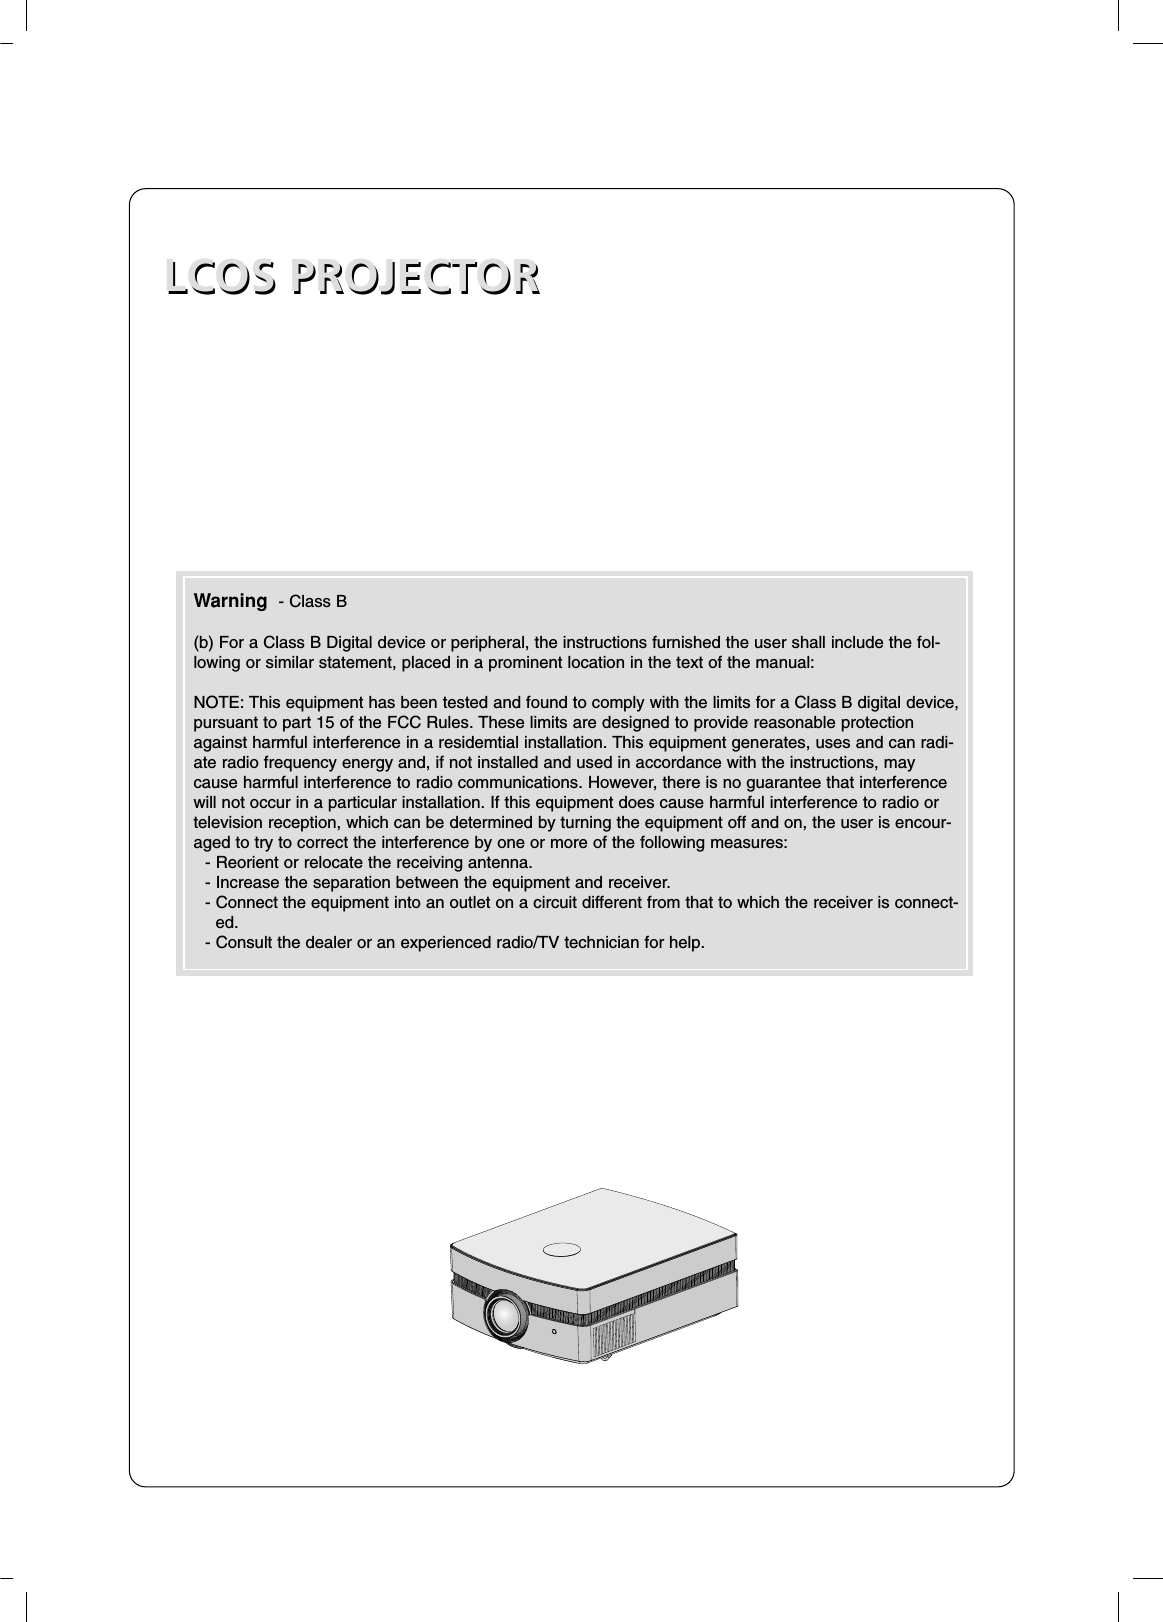 LCOS PROJECTORLCOS PROJECTORWarning  - Class B(b) For a Class B Digital device or peripheral, the instructions furnished the user shall include the fol-lowing or similar statement, placed in a prominent location in the text of the manual:NOTE: This equipment has been tested and found to comply with the limits for a Class B digital device,pursuant to part 15 of the FCC Rules. These limits are designed to provide reasonable protectionagainst harmful interference in a residemtial installation. This equipment generates, uses and can radi-ate radio frequency energy and, if not installed and used in accordance with the instructions, maycause harmful interference to radio communications. However, there is no guarantee that interferencewill not occur in a particular installation. If this equipment does cause harmful interference to radio ortelevision reception, which can be determined by turning the equipment off and on, the user is encour-aged to try to correct the interference by one or more of the following measures:- Reorient or relocate the receiving antenna.- Increase the separation between the equipment and receiver.- Connect the equipment into an outlet on a circuit different from that to which the receiver is connect-ed.- Consult the dealer or an experienced radio/TV technician for help.